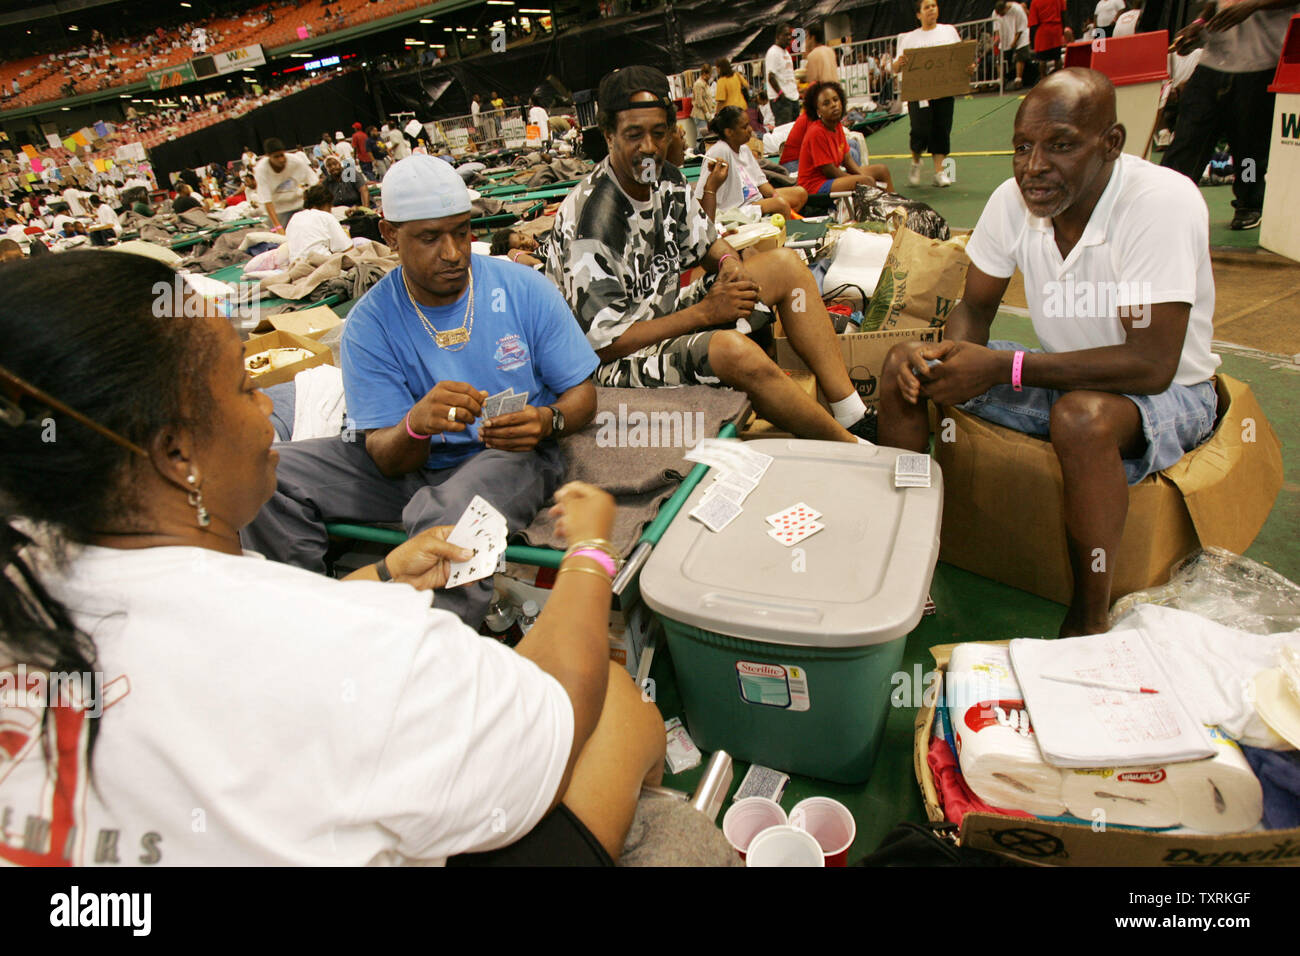 Irma Woolens (L), Andre Brown, Raydell Jasper, and Eugene Stewart, all from the St. Bernard neighborhood in New Orleans, Louisiana, play cards in the Astrodome in Houston, Texas on Friday, September 2, 2005. (UPI Photo/Chris Carson) Stock Photo